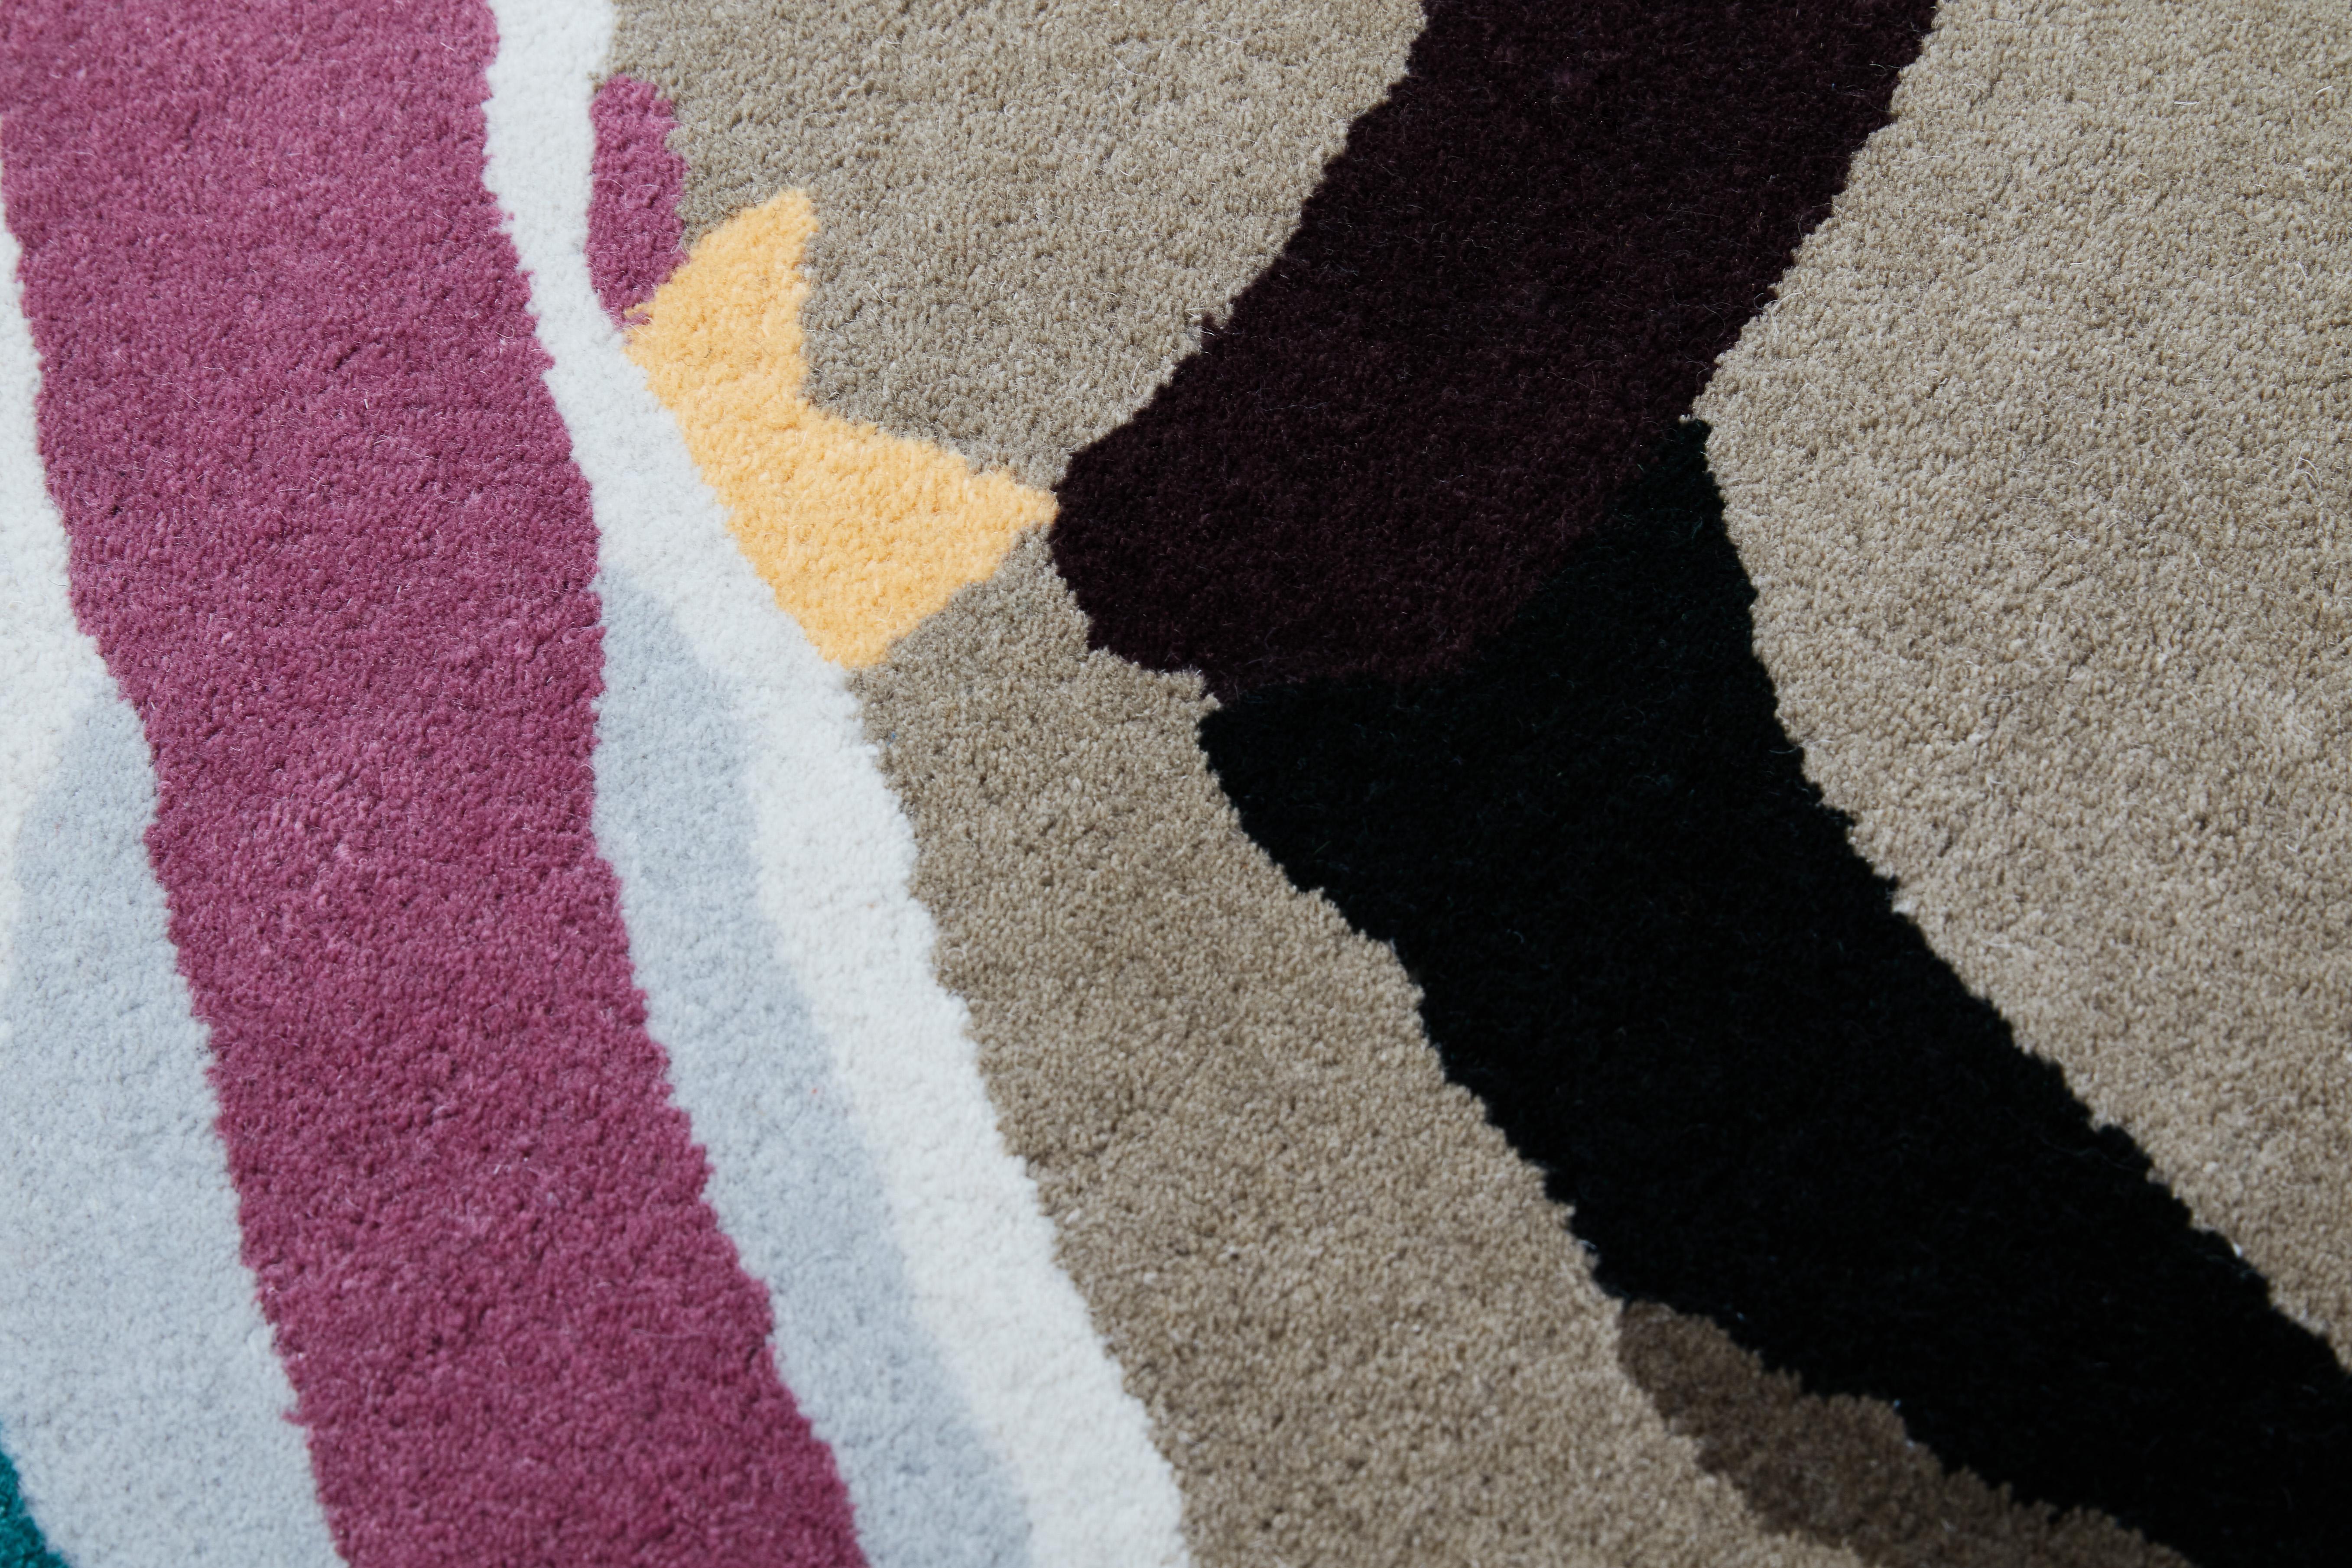 By Nodus 2018 collection.

Smoked wood by Laureline Galliot is a handtufted carpet in wool, 200 x 300 cm. The designer was inspired by wood while burning in the modern style of Bold design. Very simplified design with a very impact with colors and